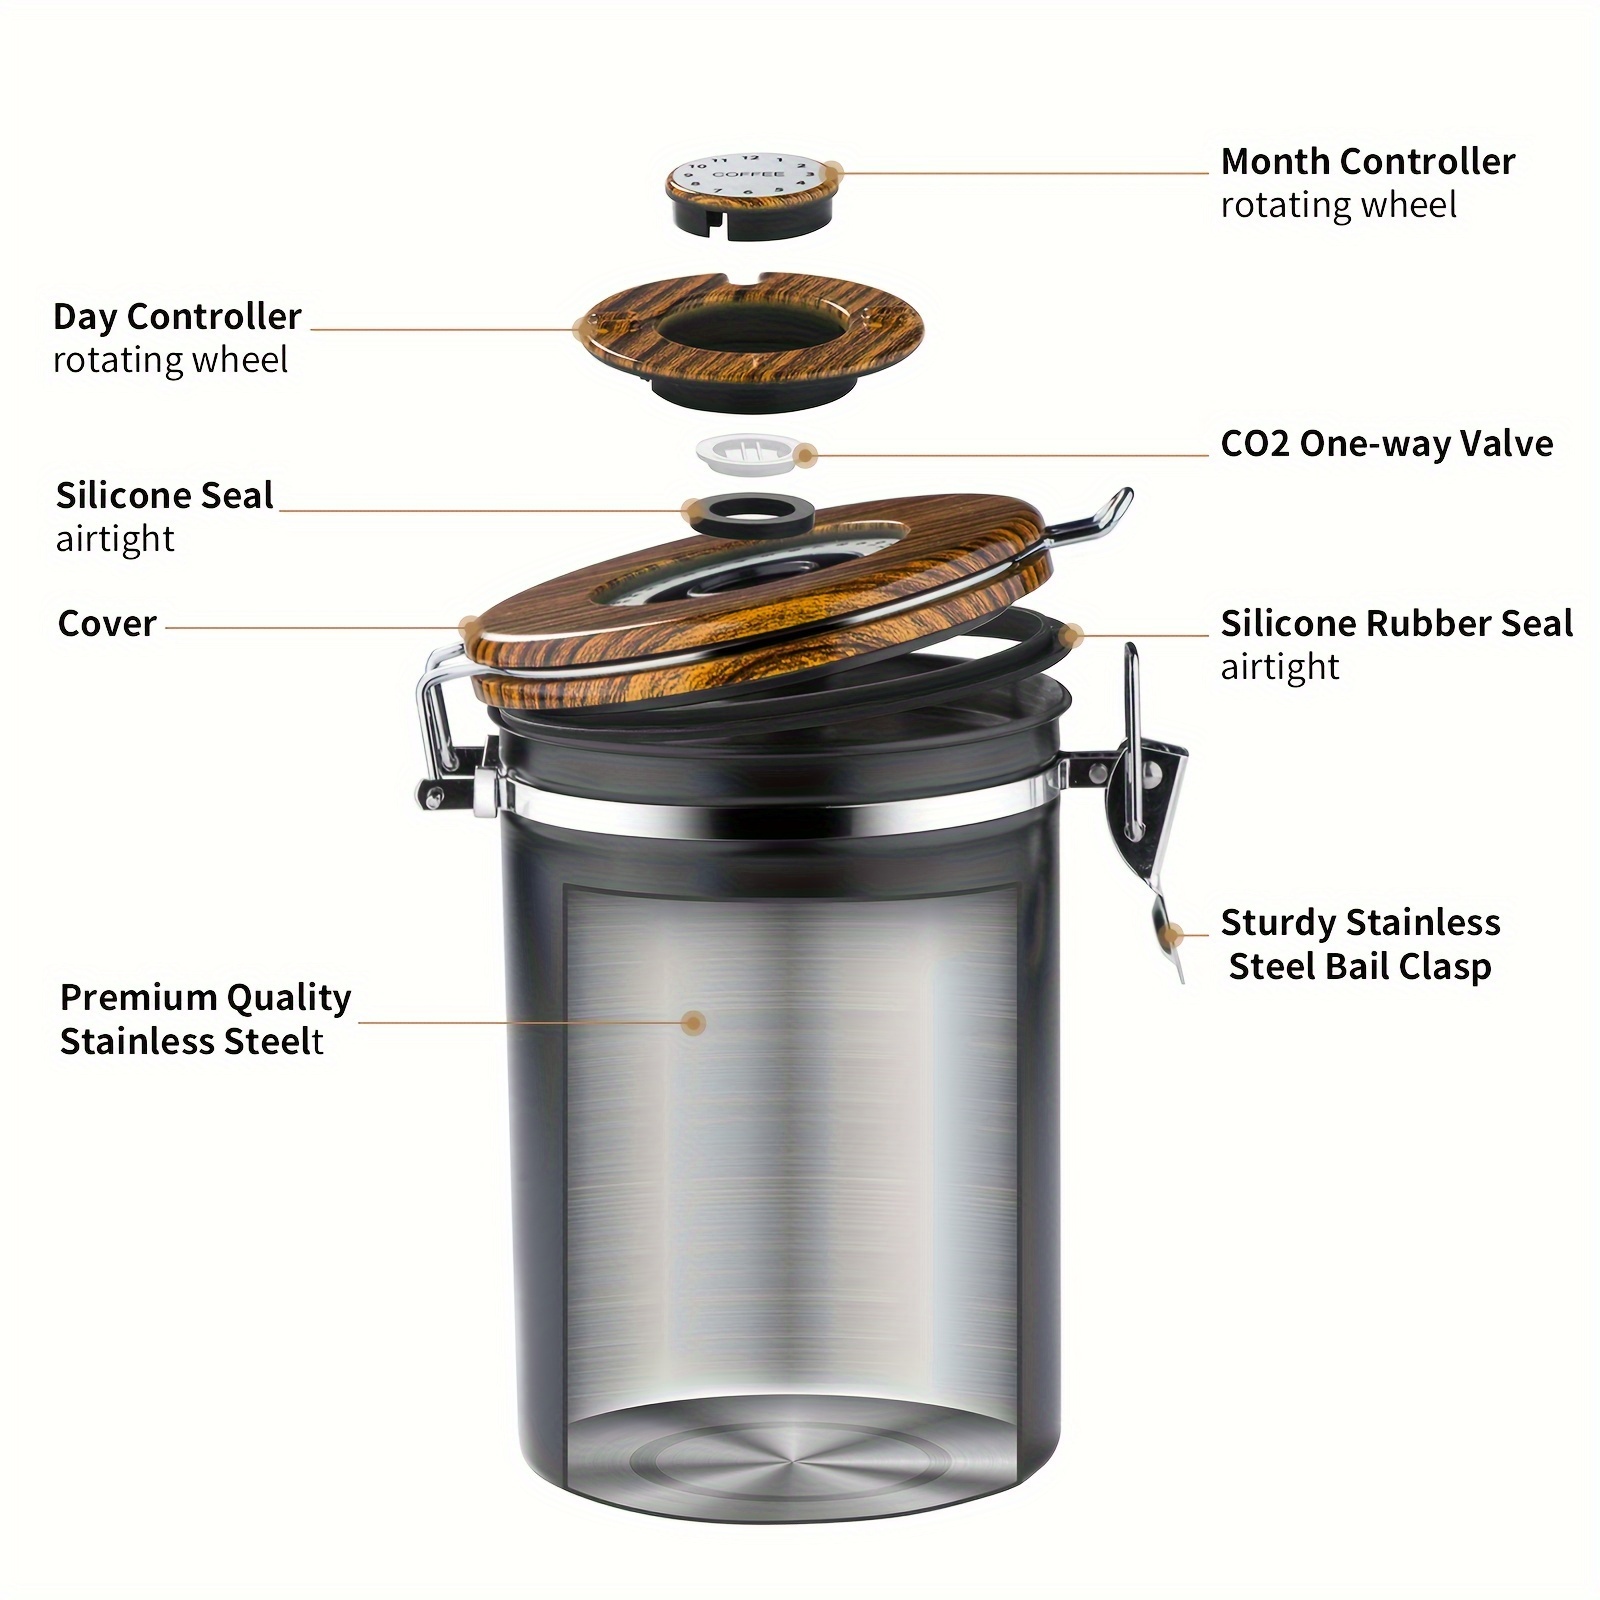 1pc Coffee Canister, Coffee Bean Storage Airtight Containers, Stainless  Steel Kitchen Food Storage Container With Date Tracker And Scoop, For  Ground C